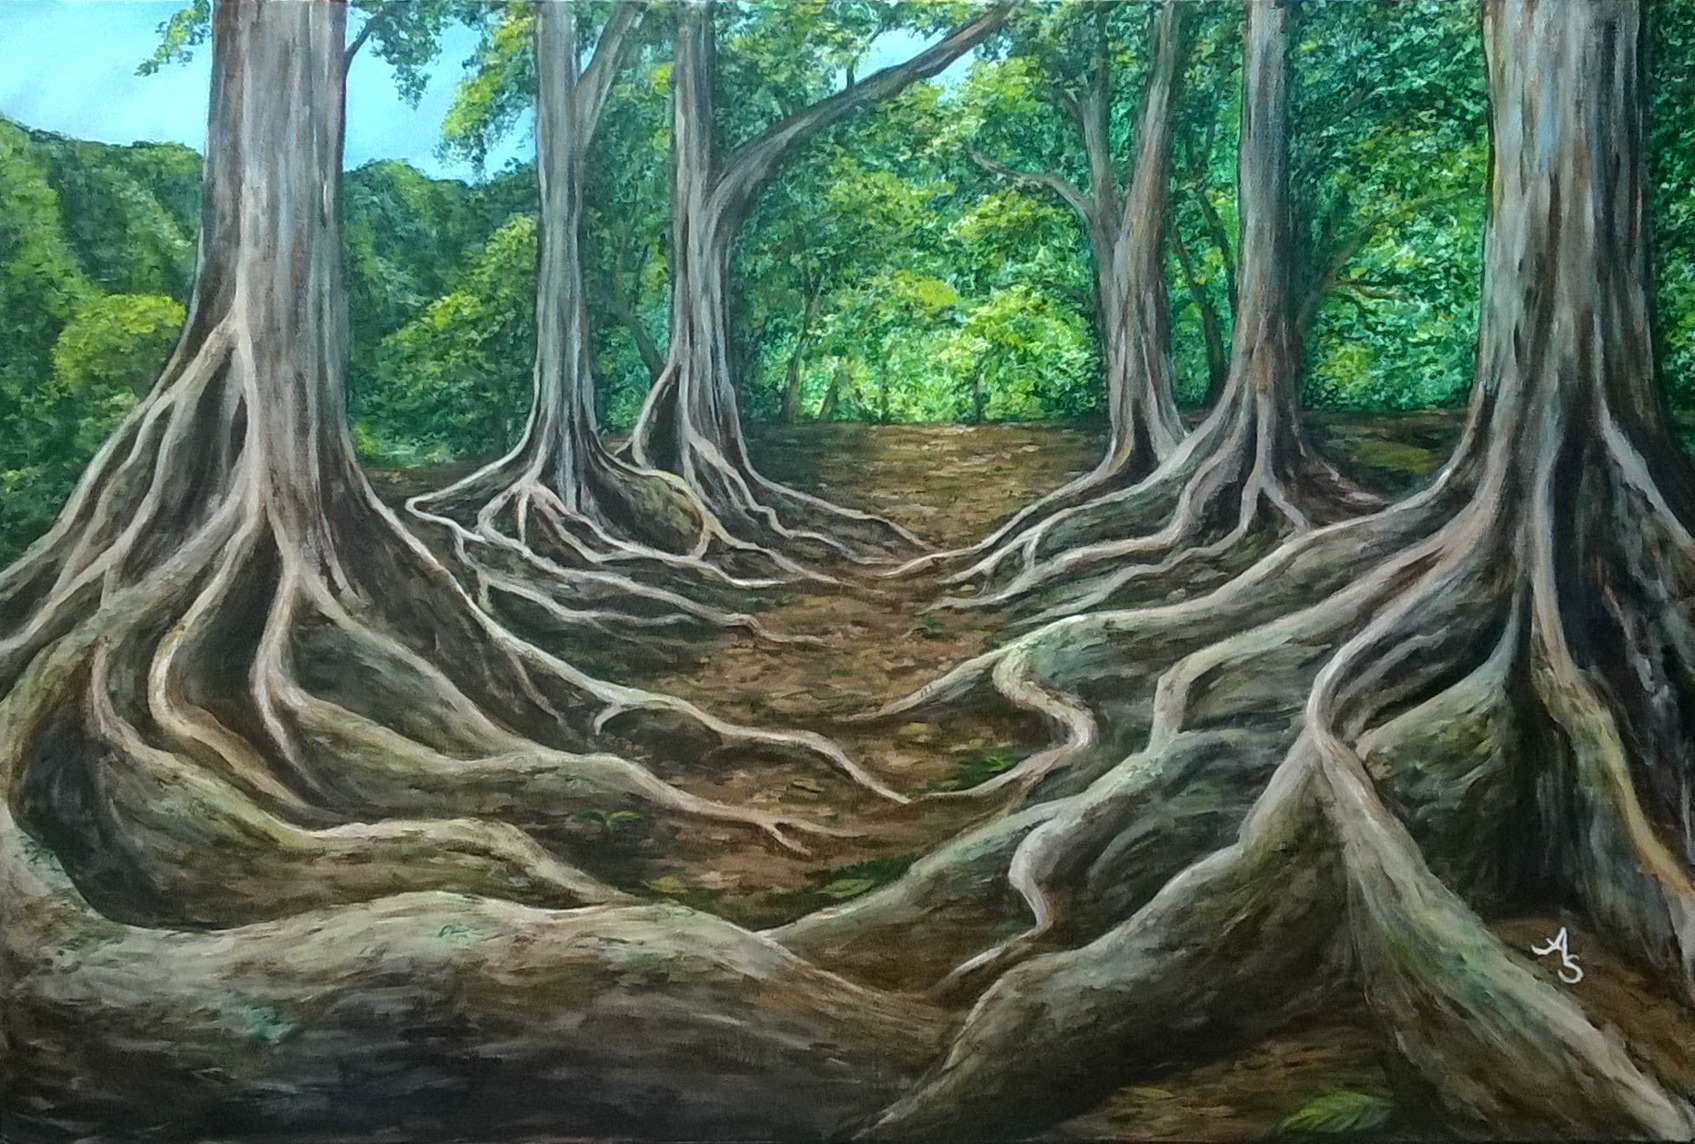 1695x1144 July 2015 As You Wish Arts - Tree Roots Painting.